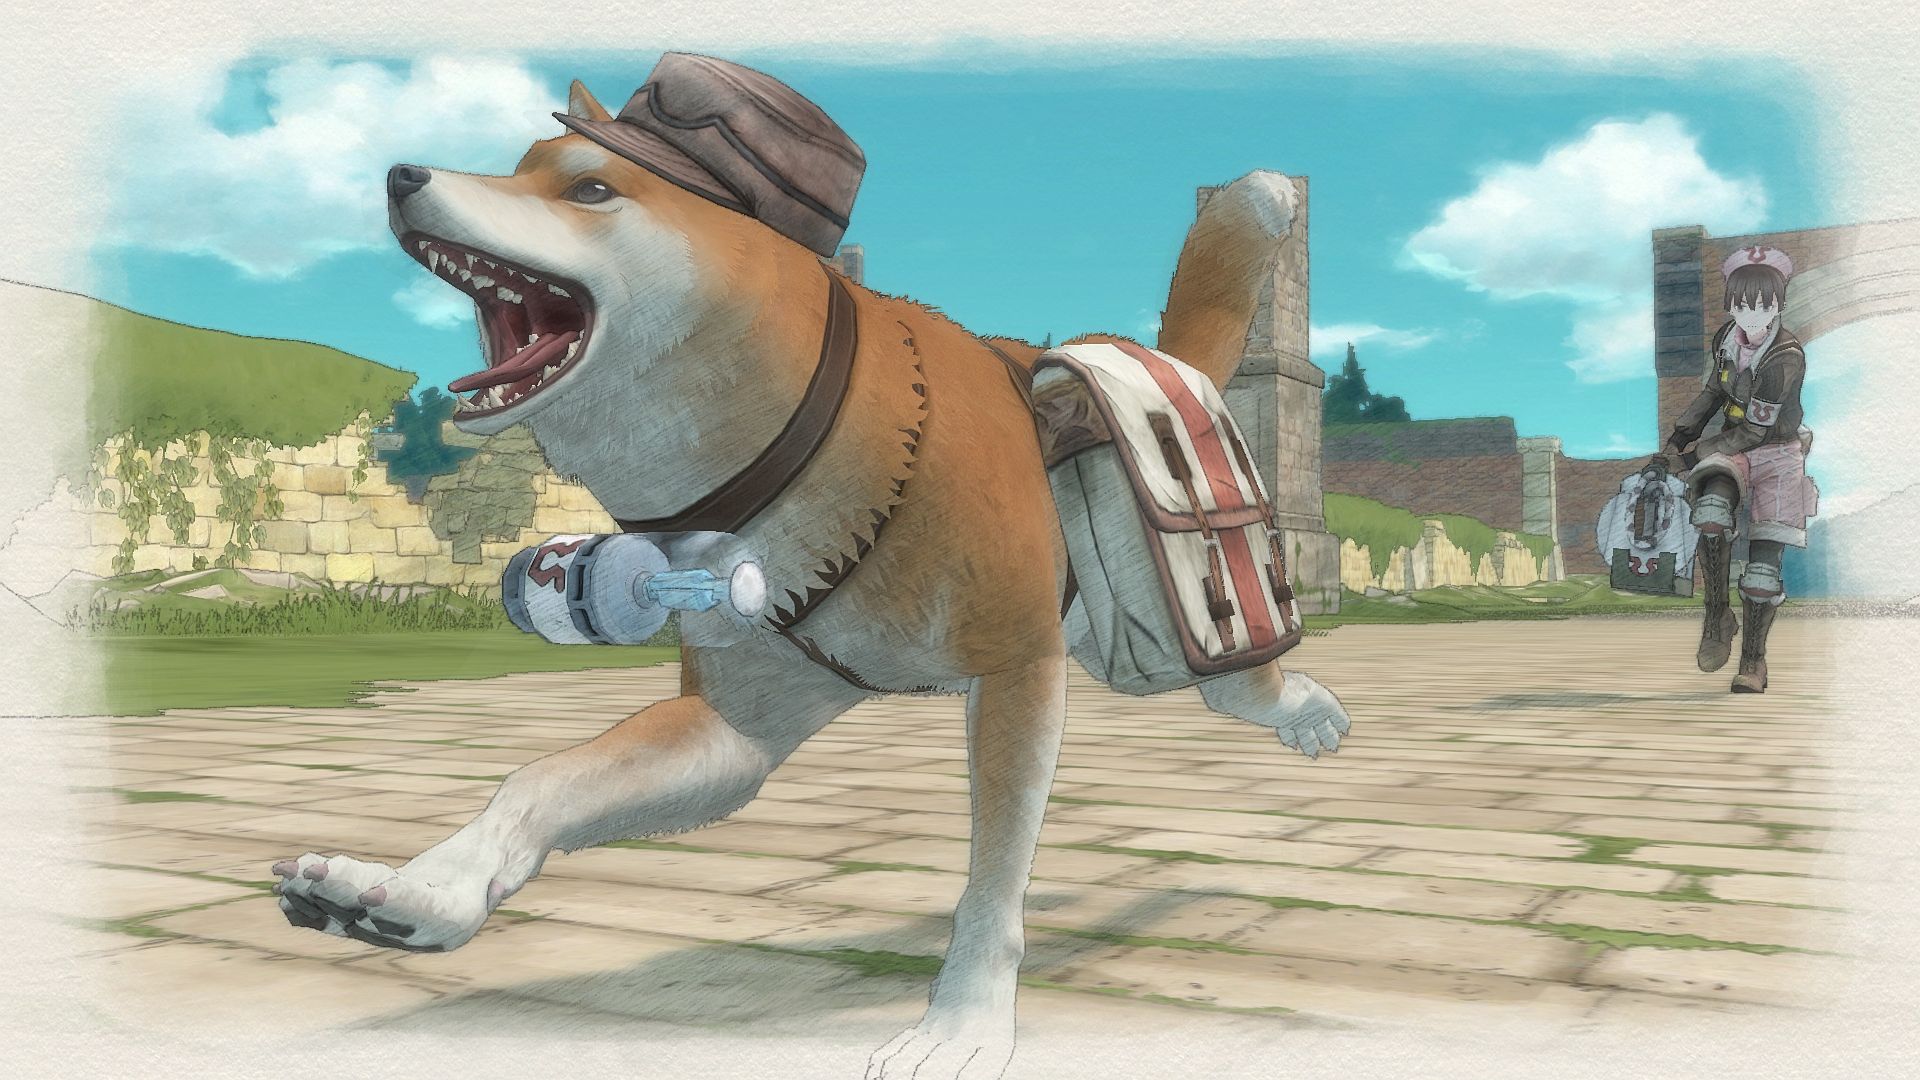 http://www.perfectly-nintendo.com/wp-content/gallery/valkyria-chronicles-4-17-01-2018/011.jpg